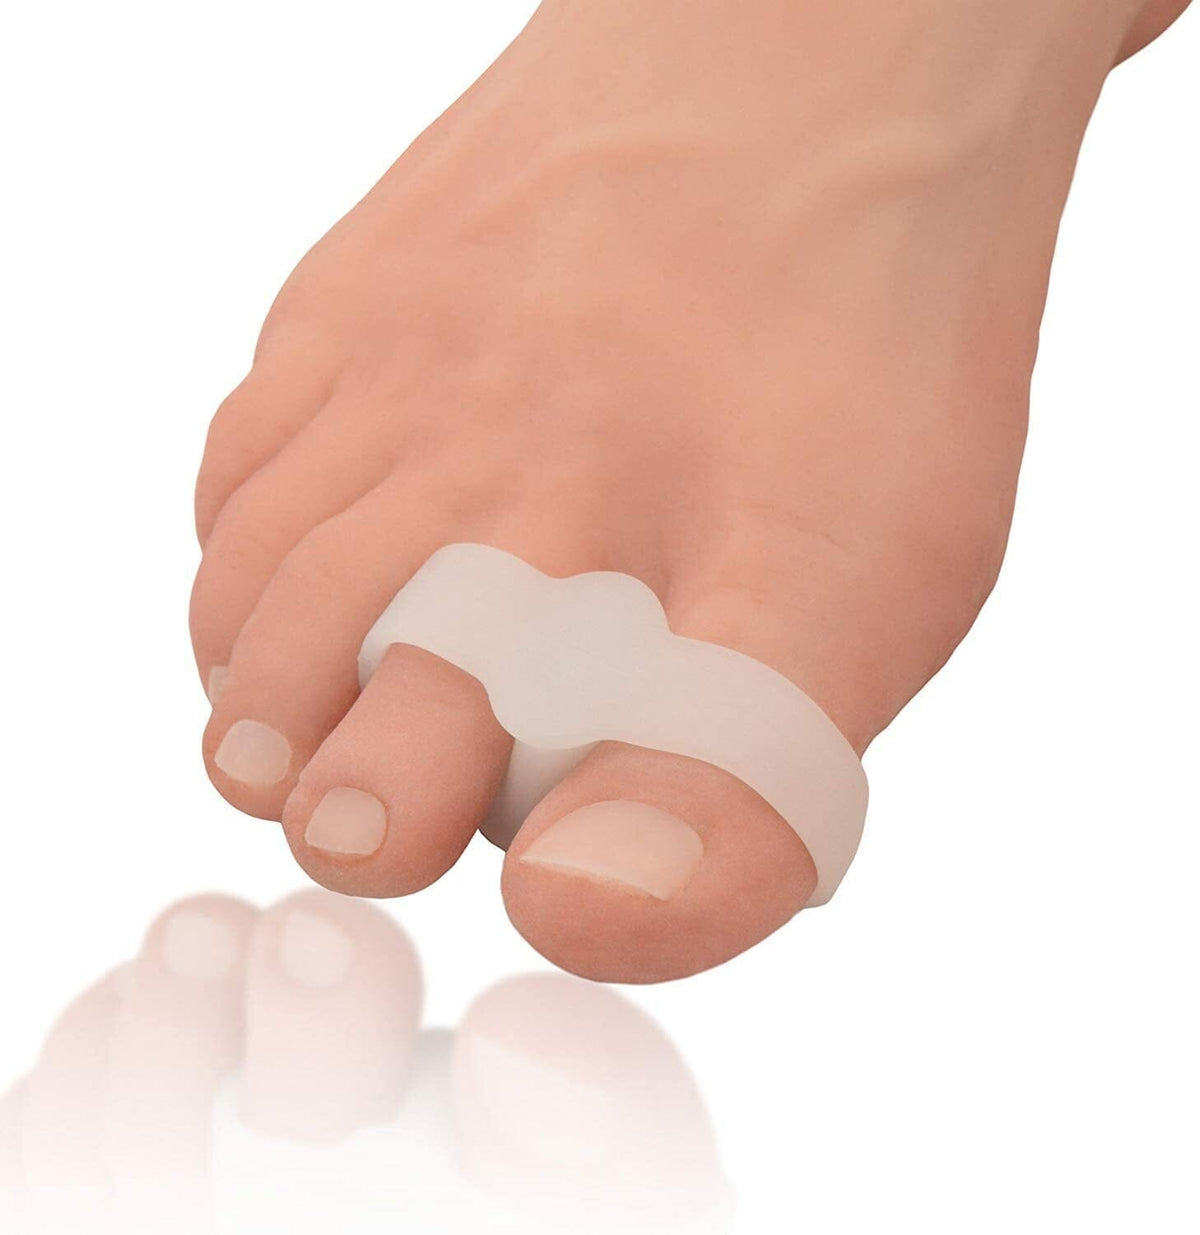 Dr. Frederick&#39;s Original Sport Bunion Toe Spacer Set - 4Pcs - Soft Gel Splints - One Size Fits All - Fast Relief - Wear with Shoes - for Men &amp; Women Foot Pain Dr. Frederick&#39;s Original 